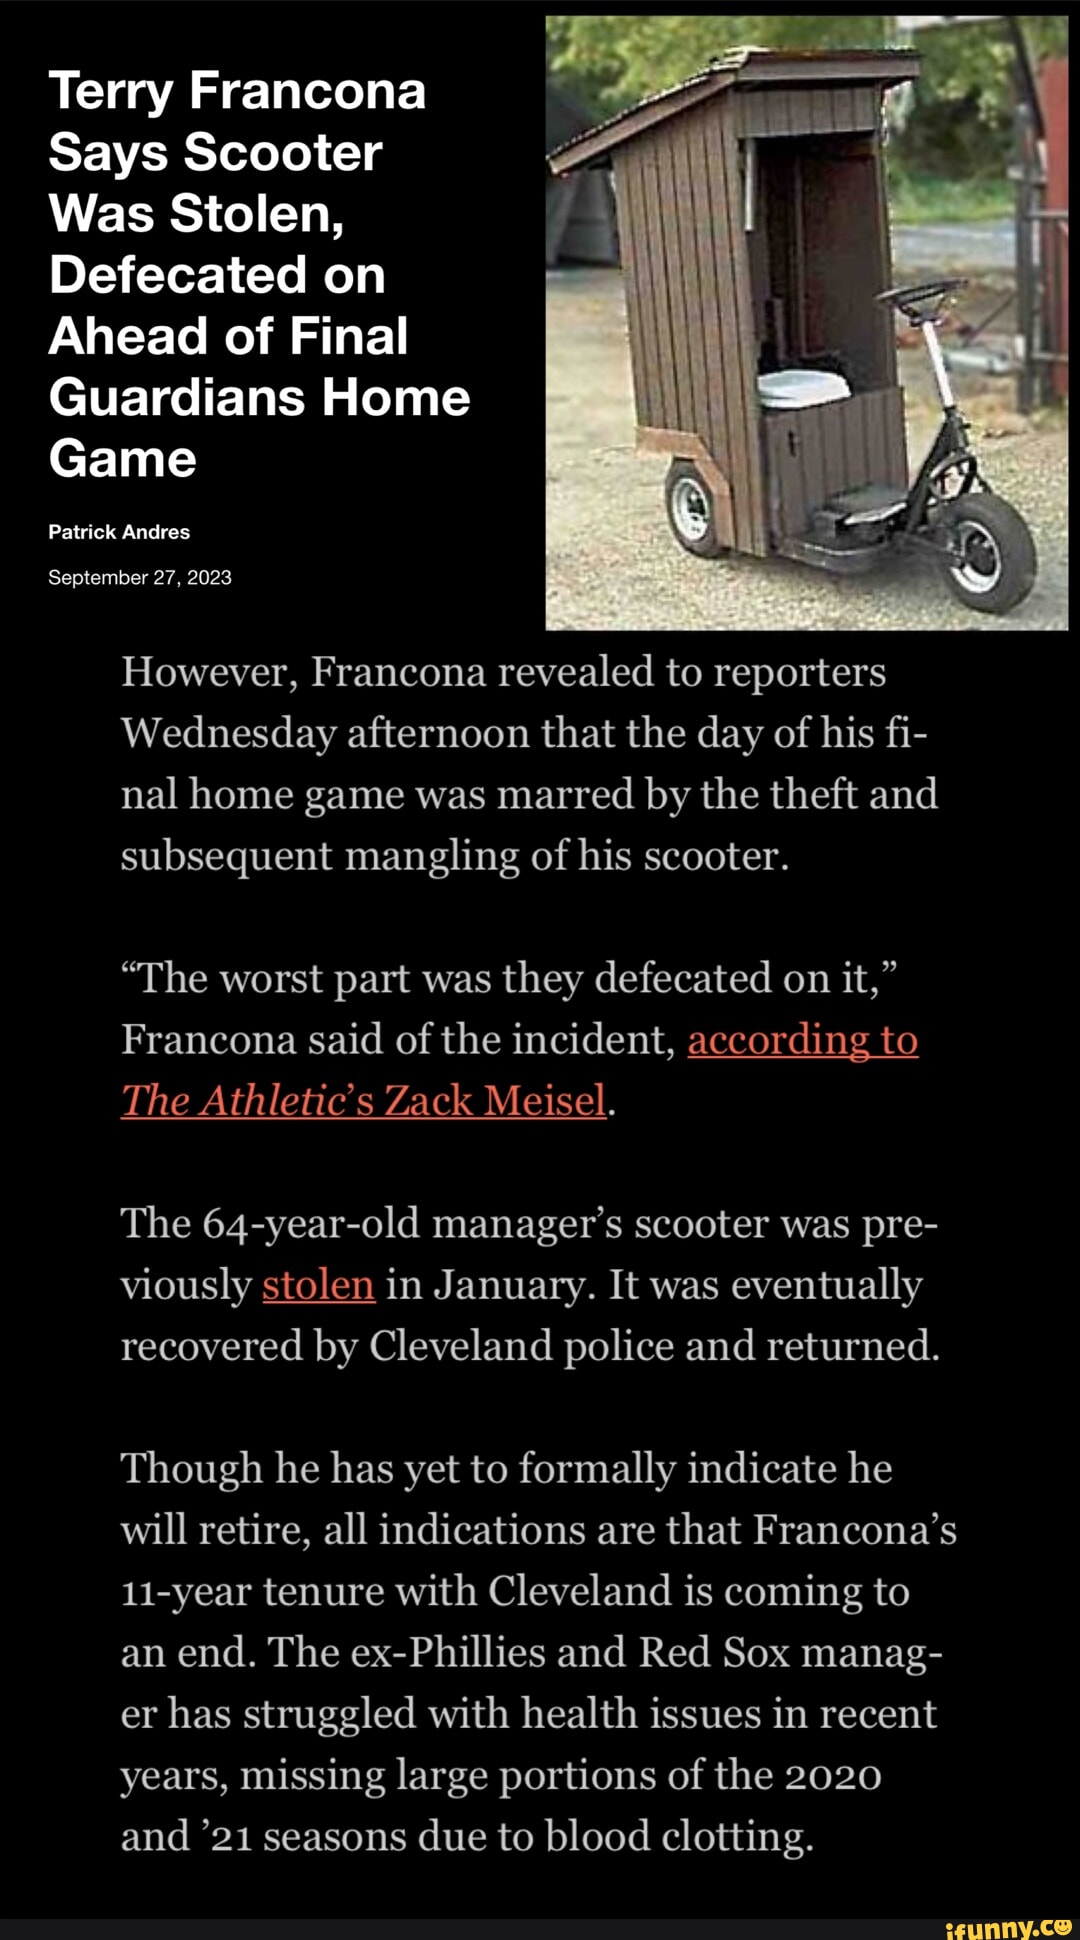 Terry Francona's Scooter Stolen, 'Defecated On' Before Home Finale